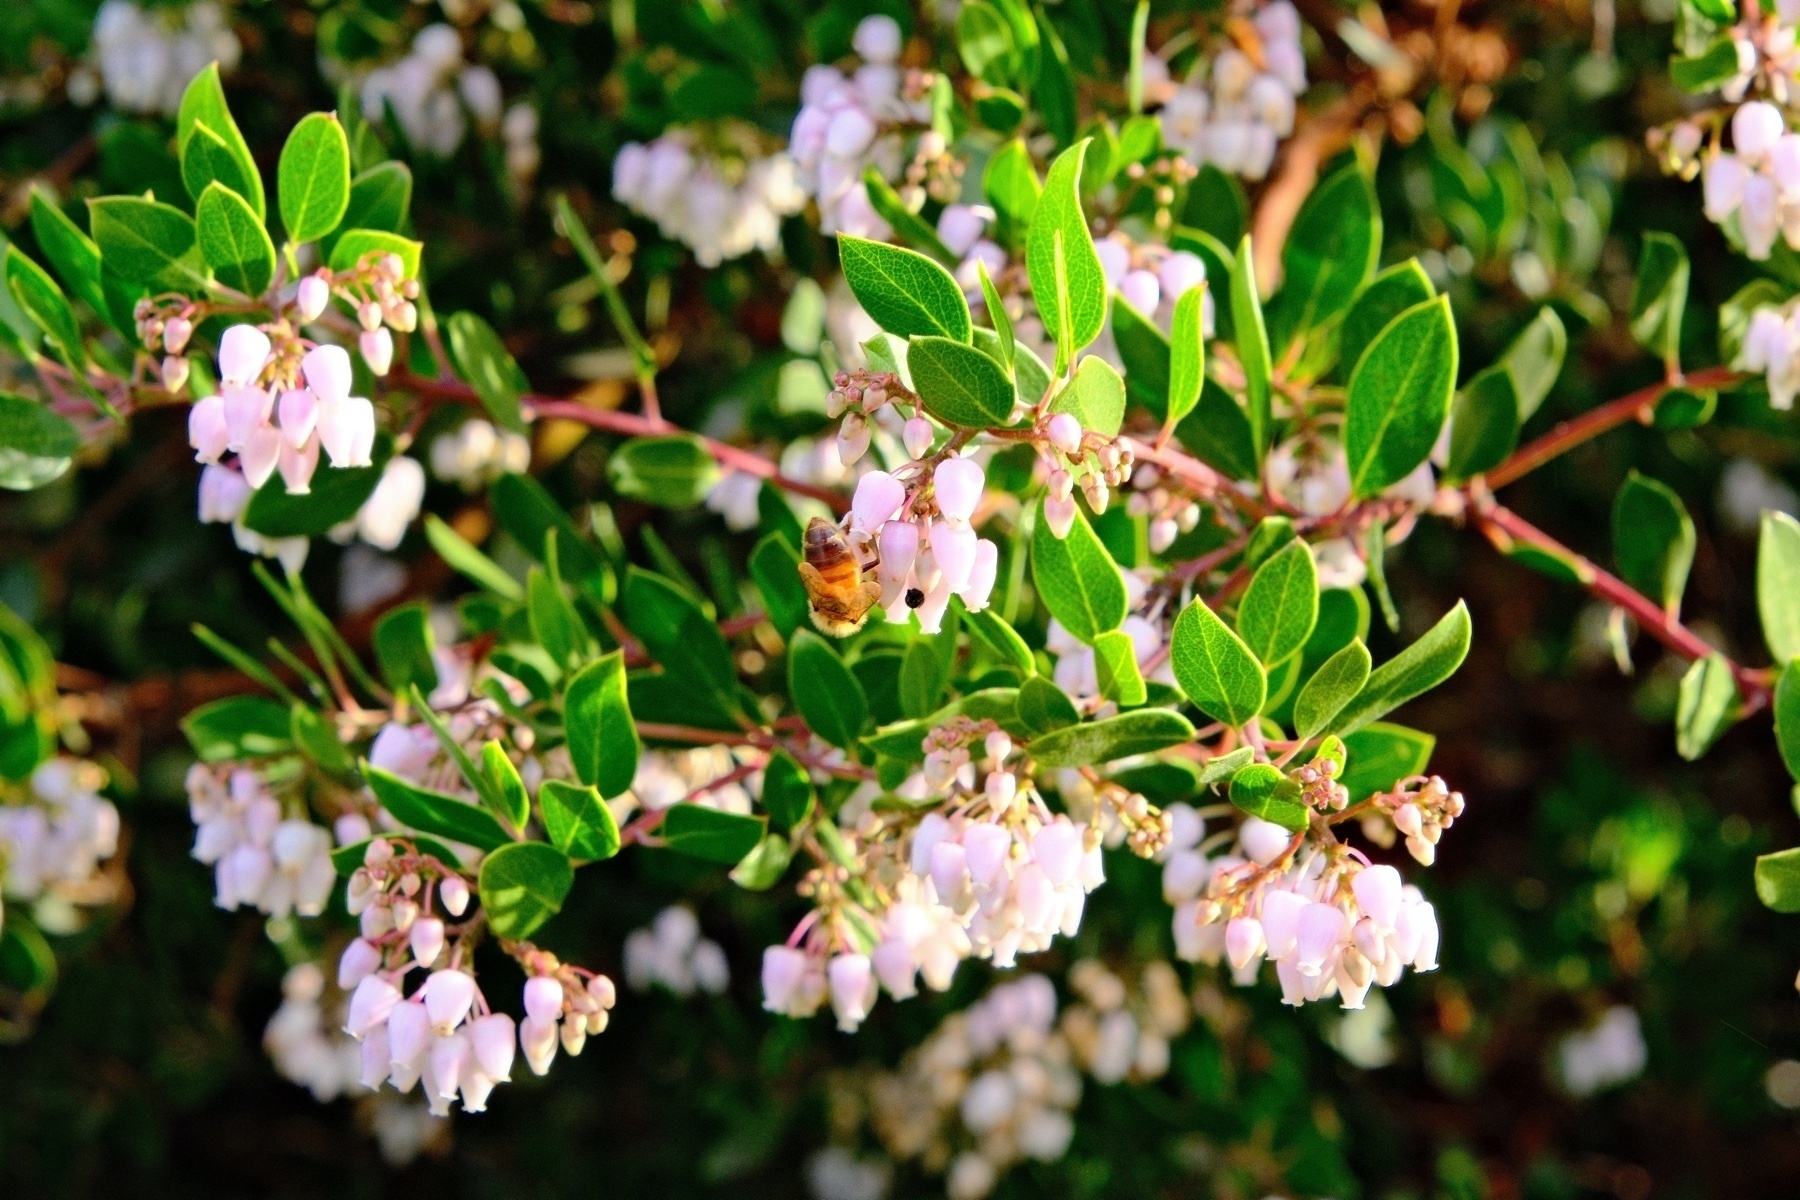 A European Honeybee on pink-white clusters of bell shaped manzanita flowers. The stems are rust red and the leaves are bright green, shaped like perfect smooth leaves